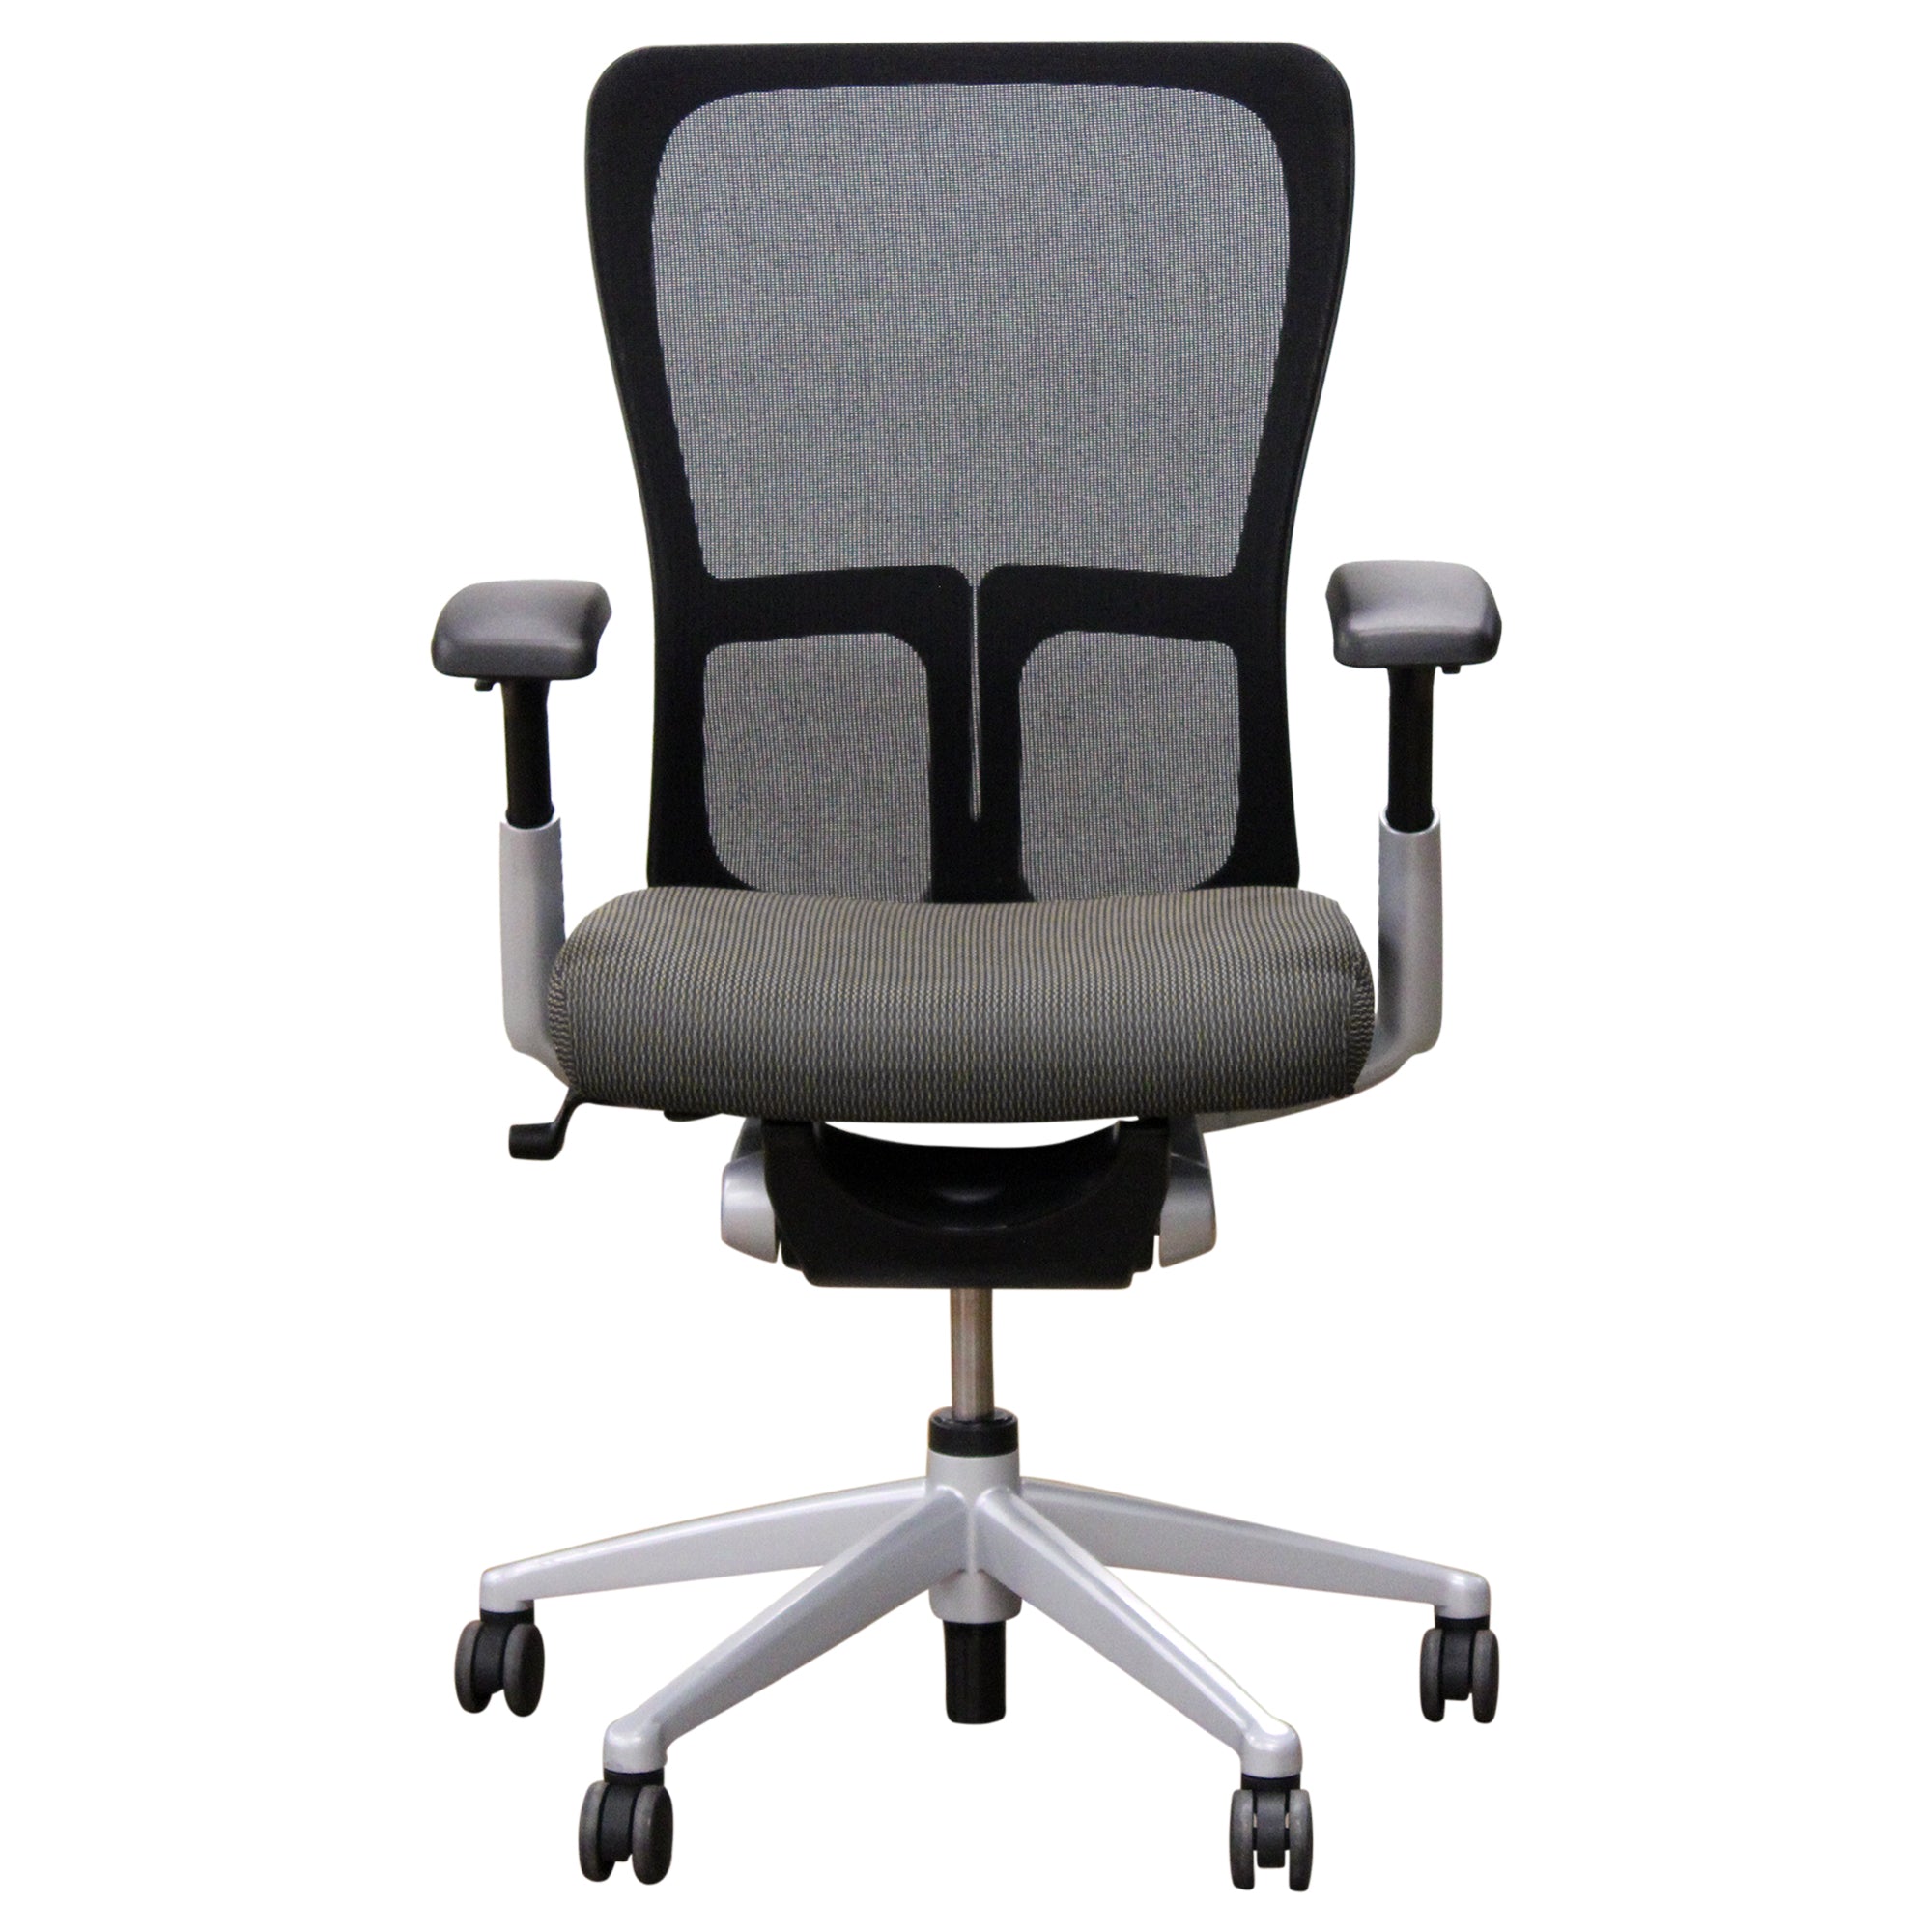 Used Office Chairs : Haworth Zody Task Chair - (Grey Striped) at Furniture  Finders